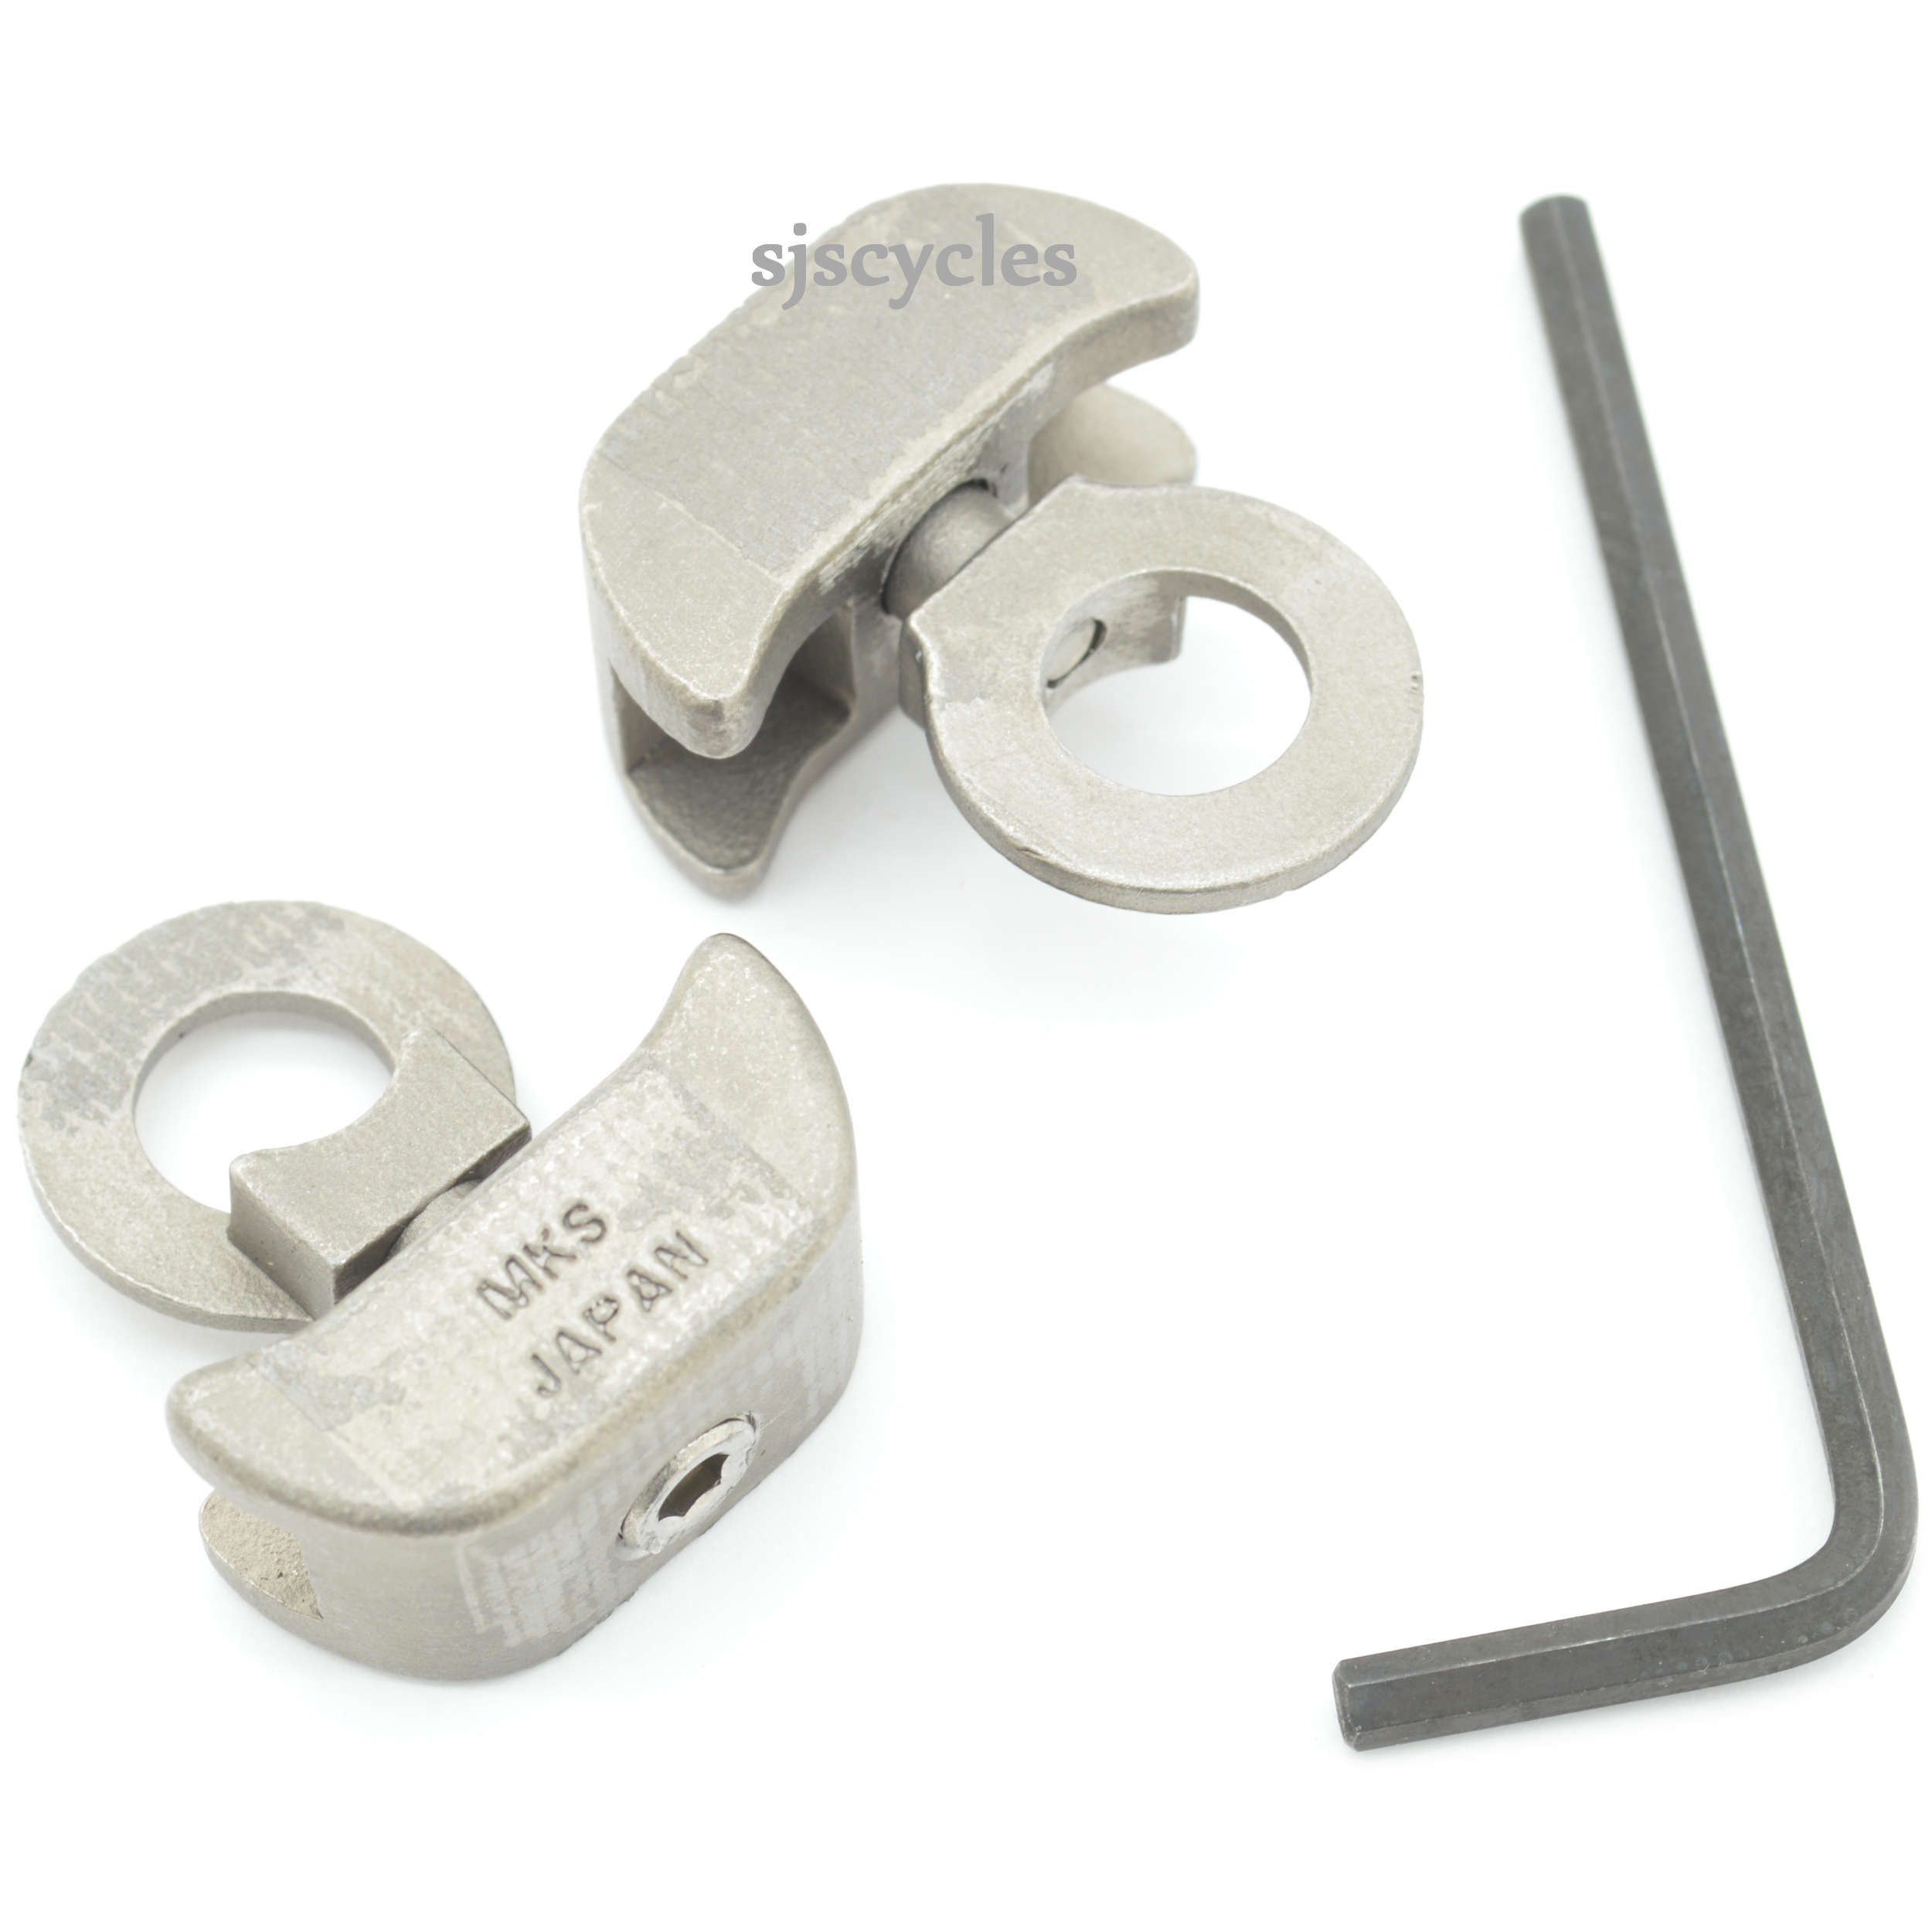 MKS NJS Track Chain Tensioners for 10mm Axle for sale online 